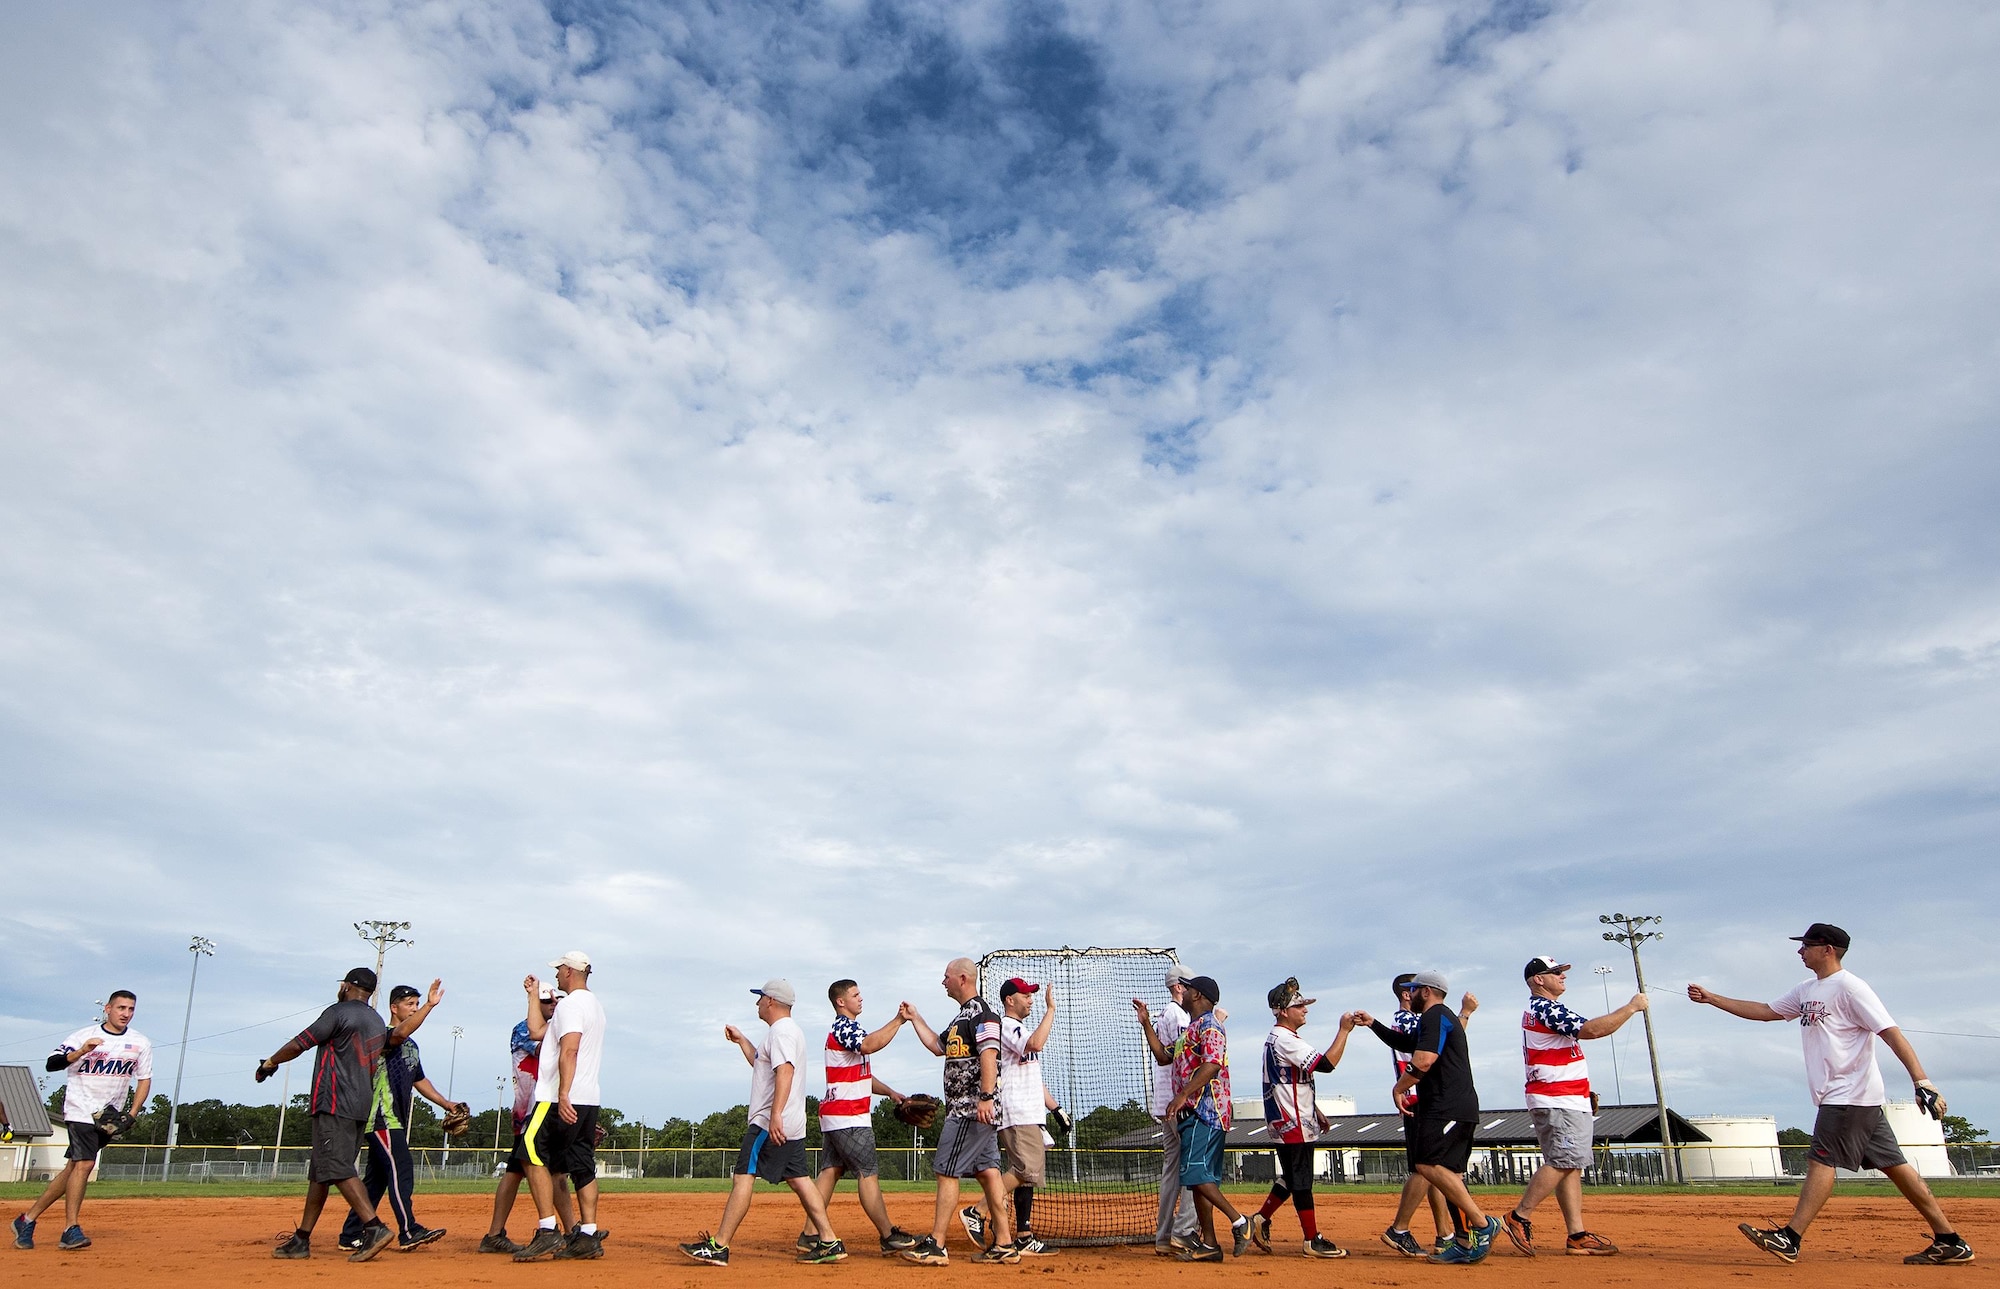 Members of the 96th Maintenance Squadron and the 359th Training Squadron intramural softball teams greet each other in the middle of the field after their game July 17 at Eglin Air Force Base, Fla.  The league-leading Maintainers pounded the training squadron 10-5 to improve to 9-1 on the season.  (U.S. Air Force photo/Samuel King Jr.)